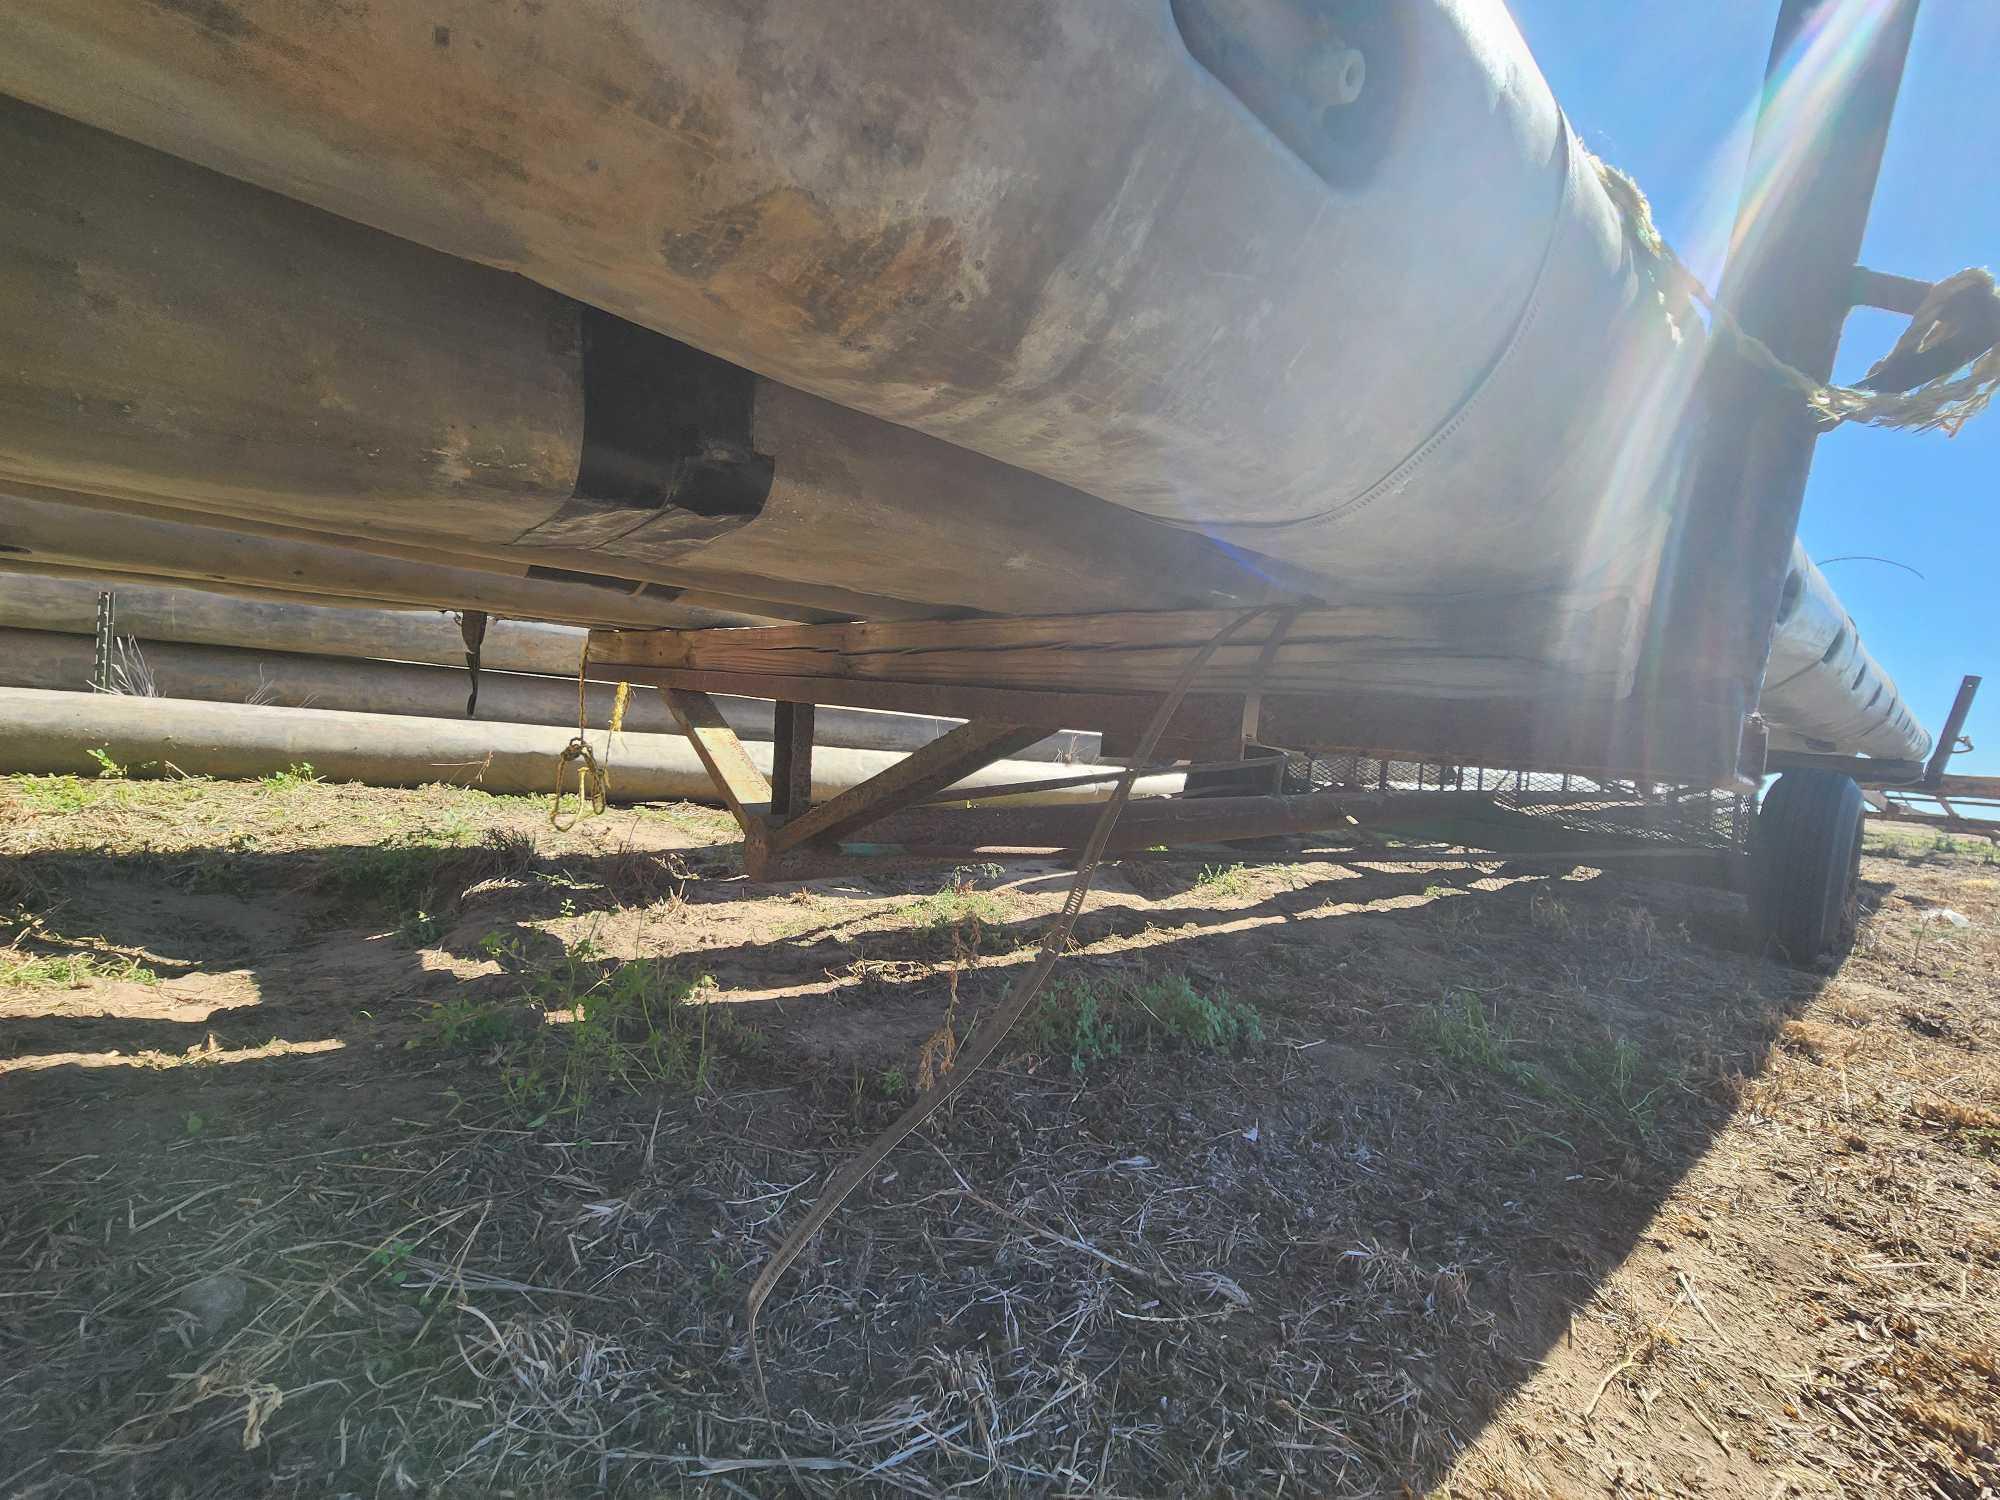 Group of Aluminum Irrigation Pipes on Flat-Bed 19'x8'5" Trailer19FT X 8FT 5IN.